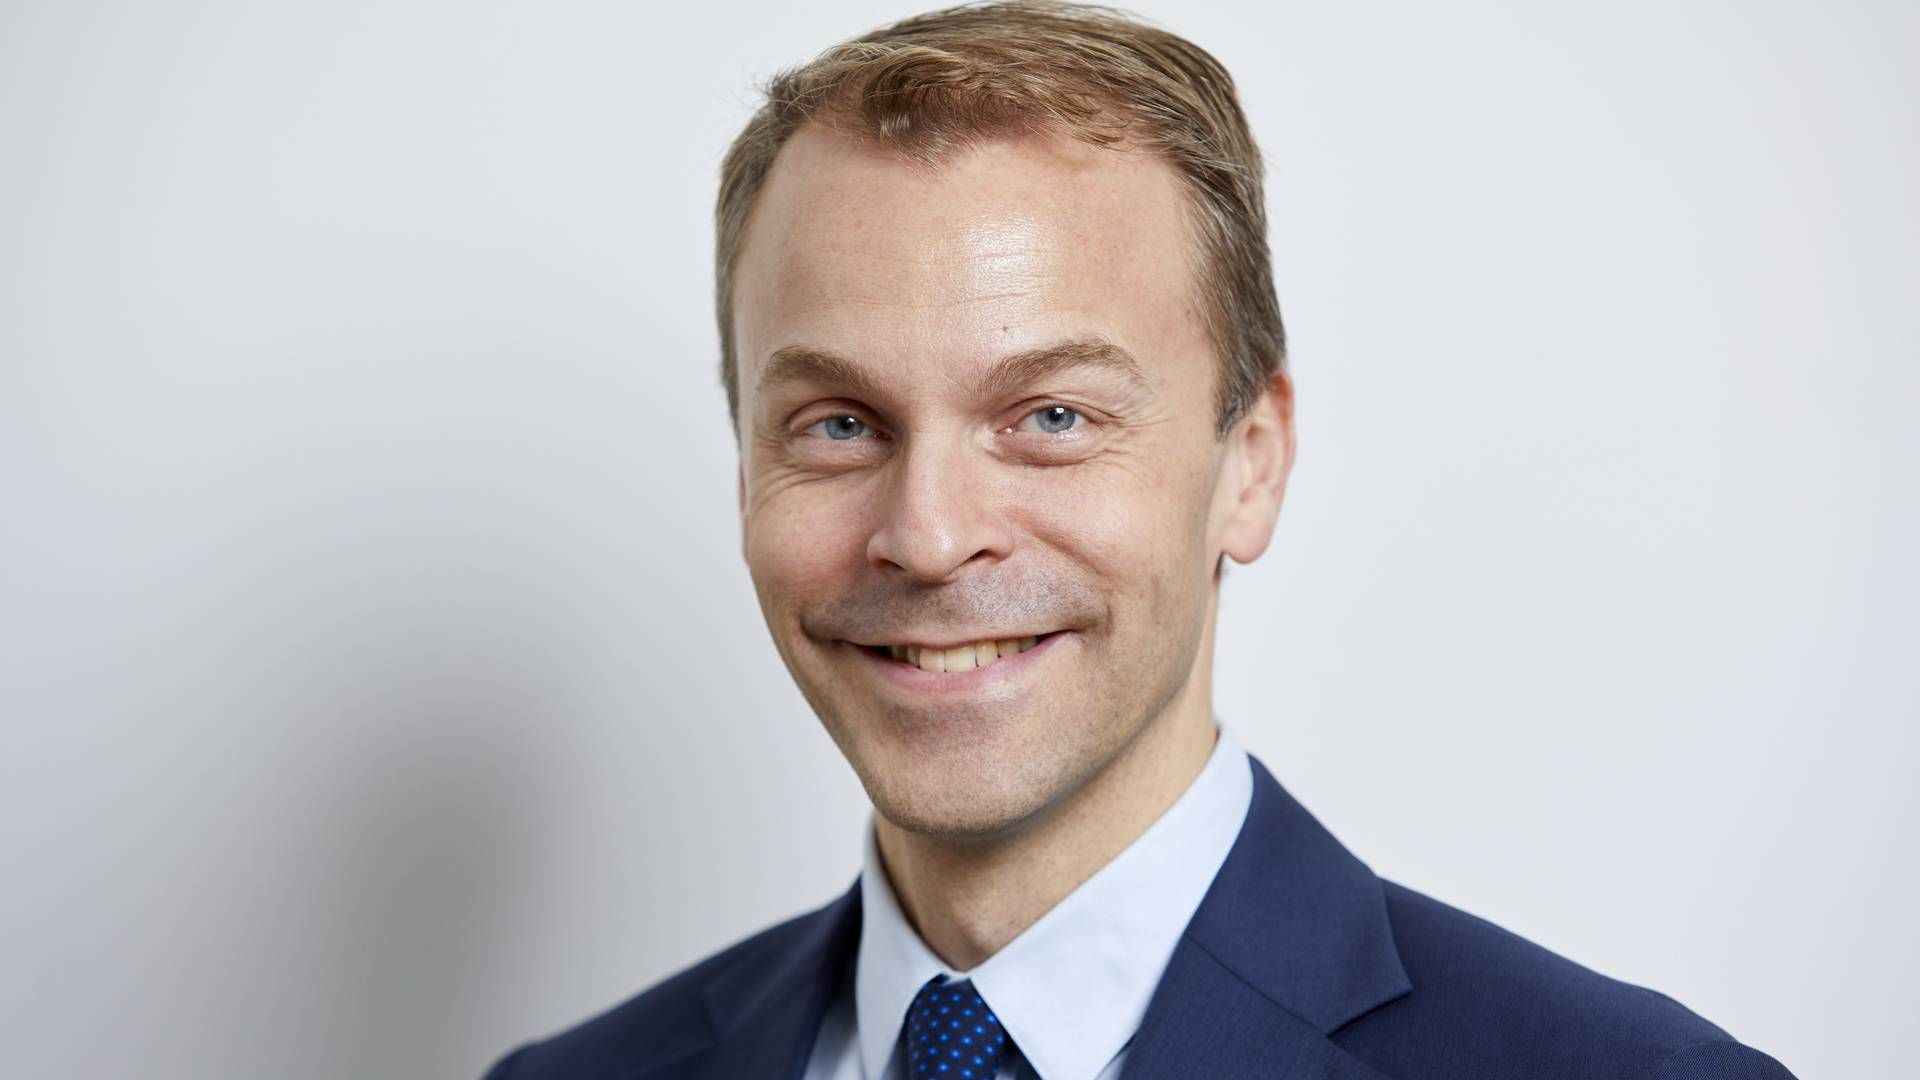 Morten Rask Nymark, head of listed equities at Industriens Pension. | Photo: PR / Industriens Pension